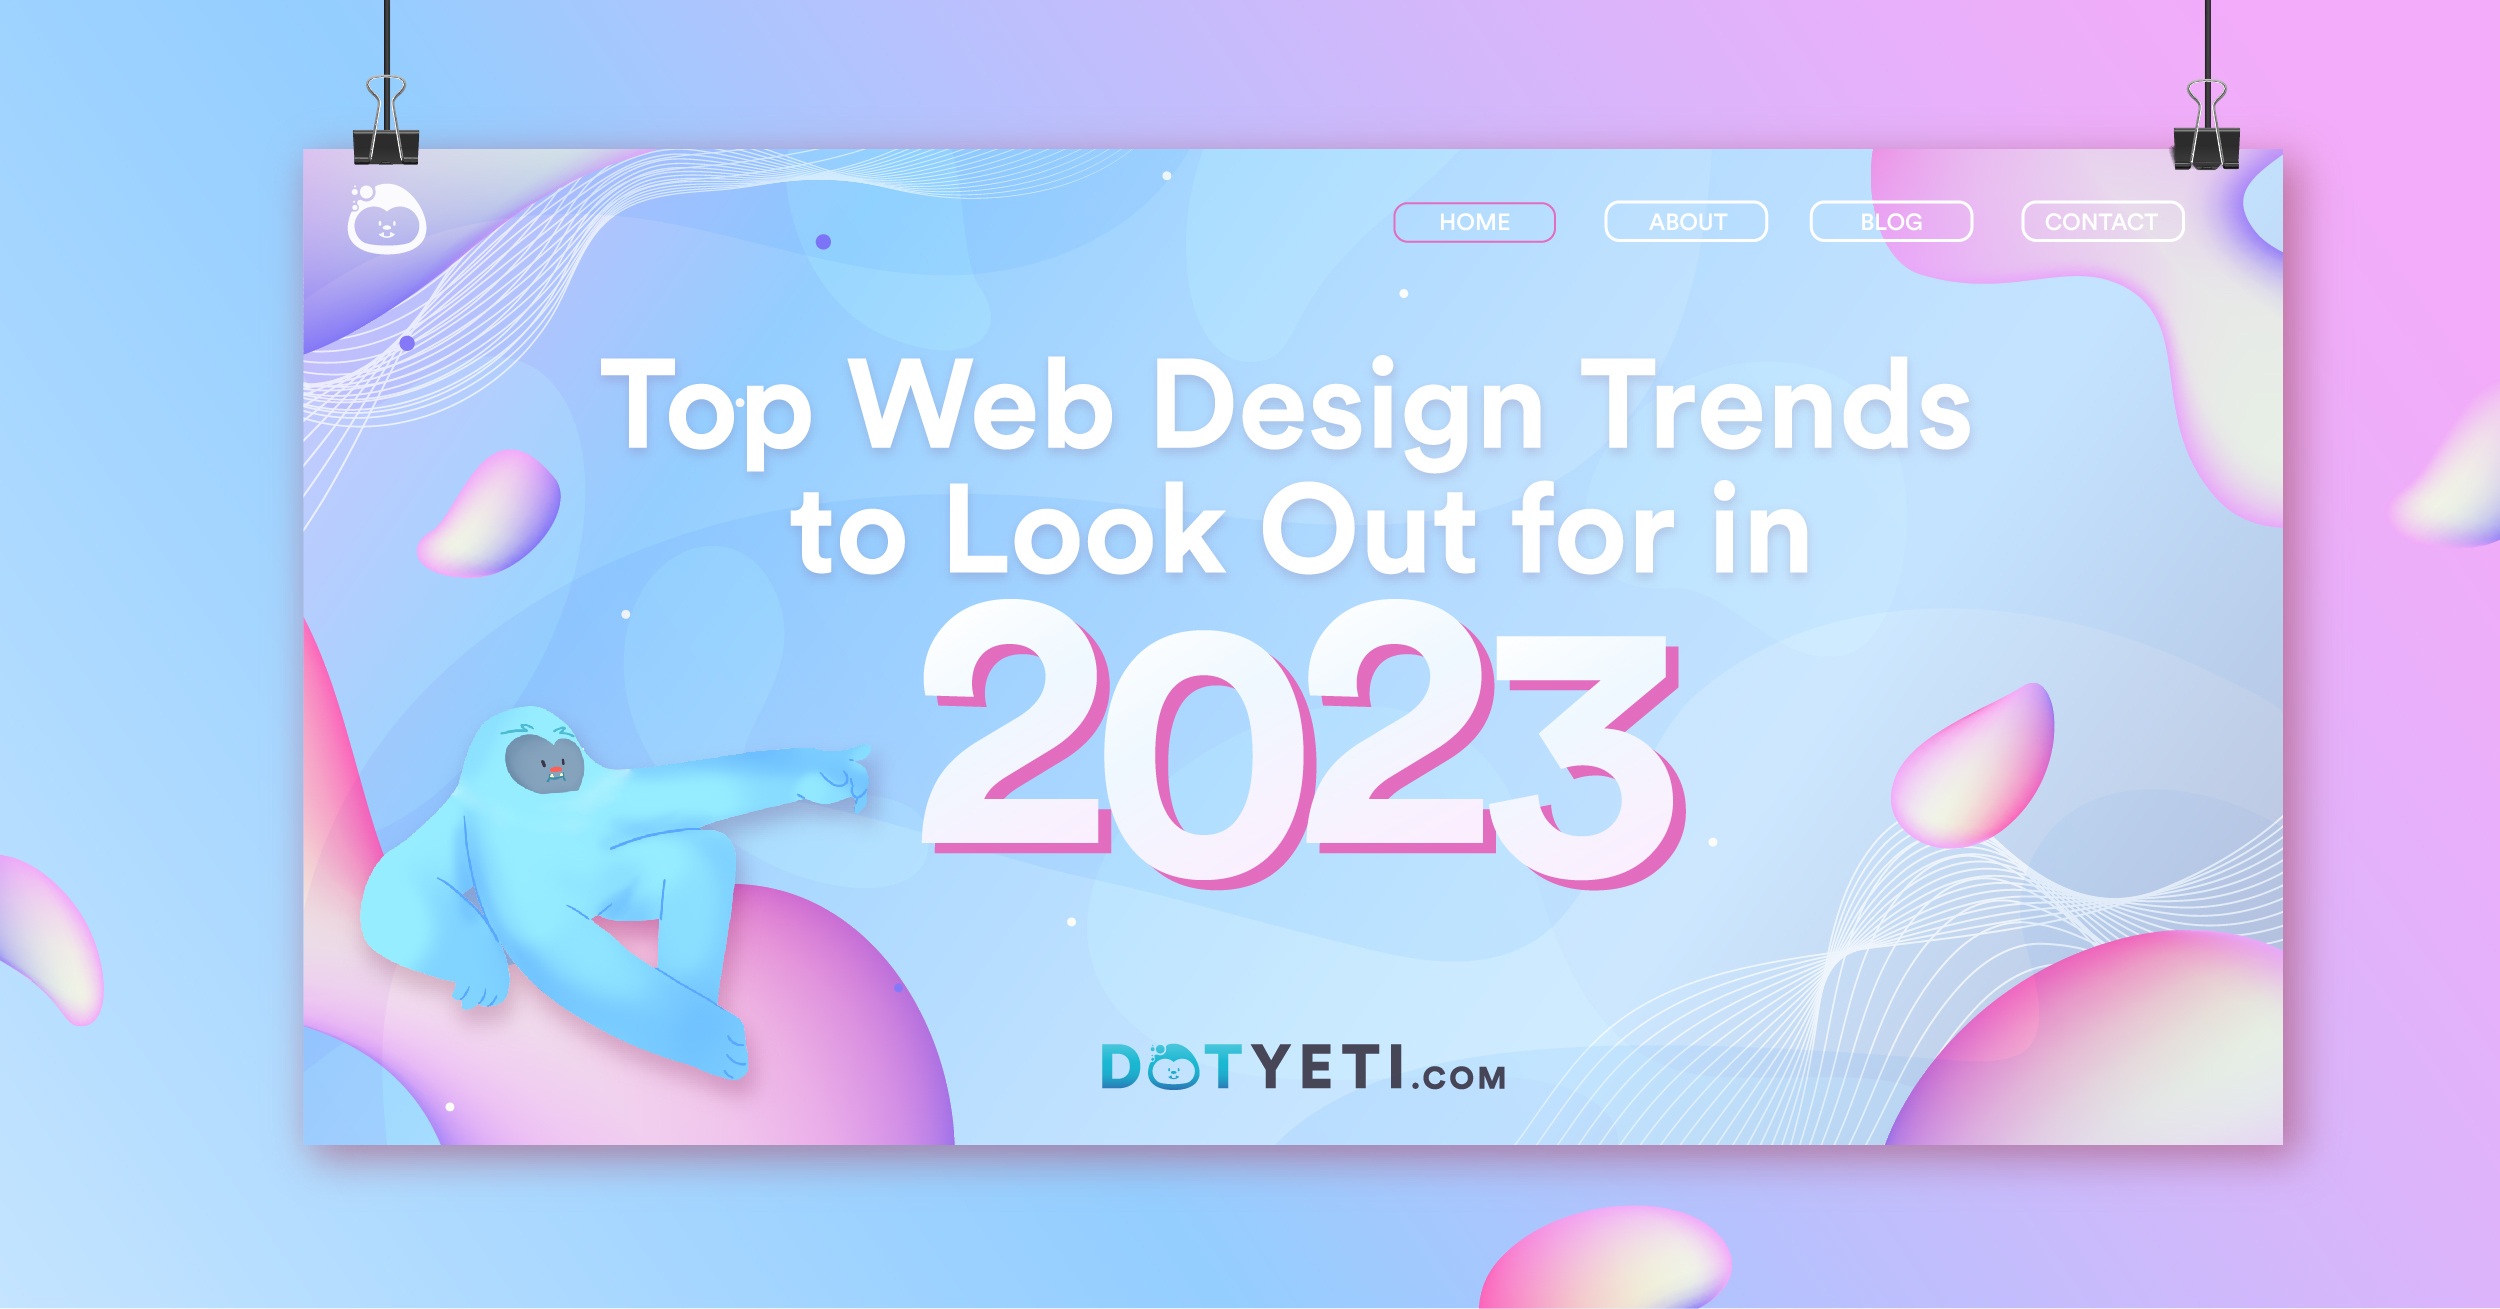 Watch Out For These Top Web Design Trends In 2023